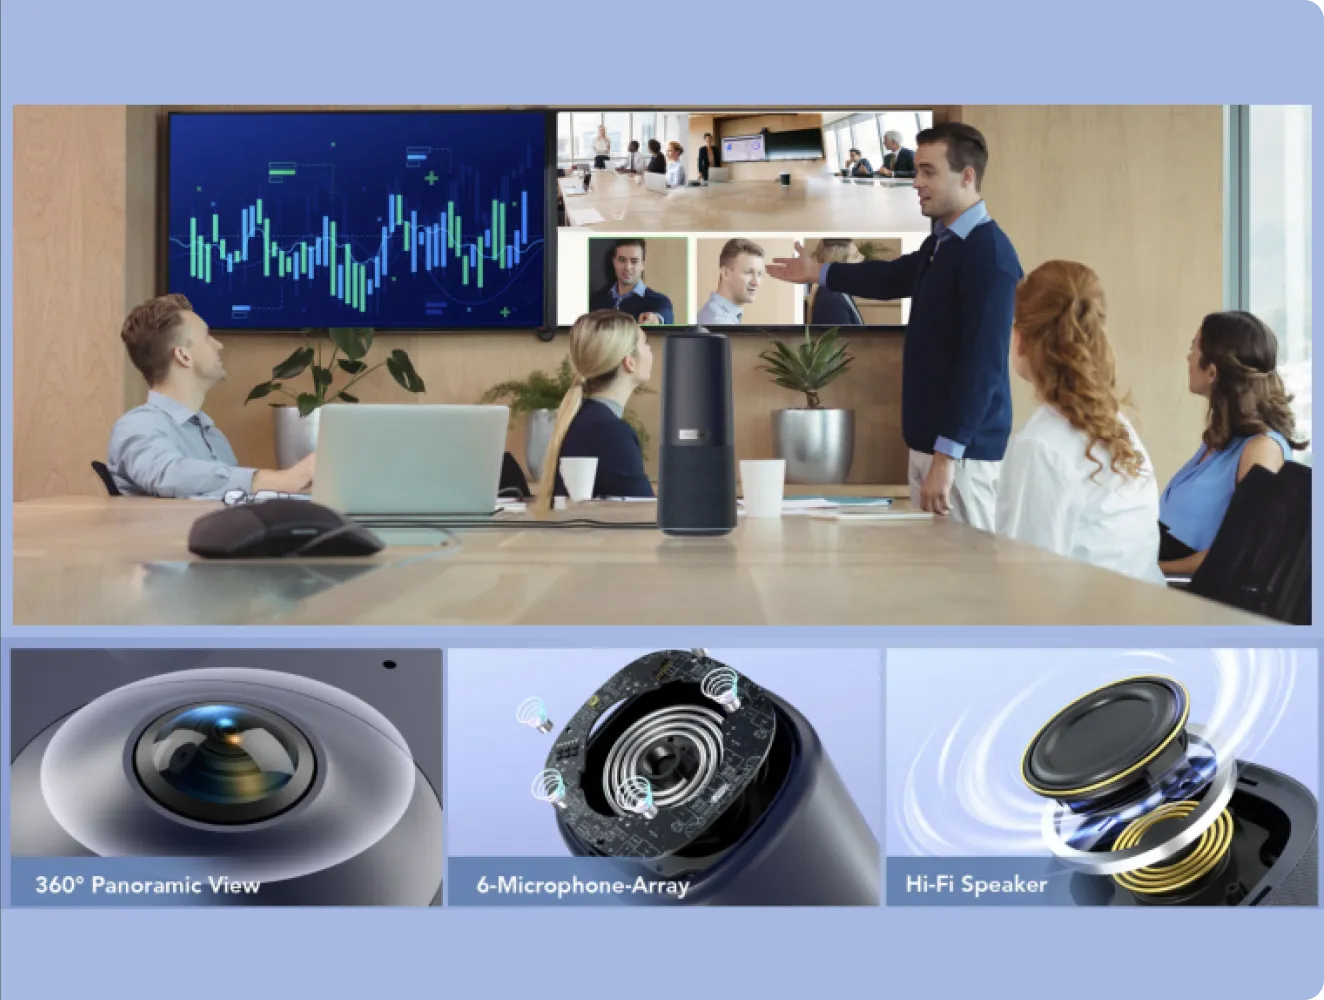 Most Immersive Meeting Experience with Panoramic Camera